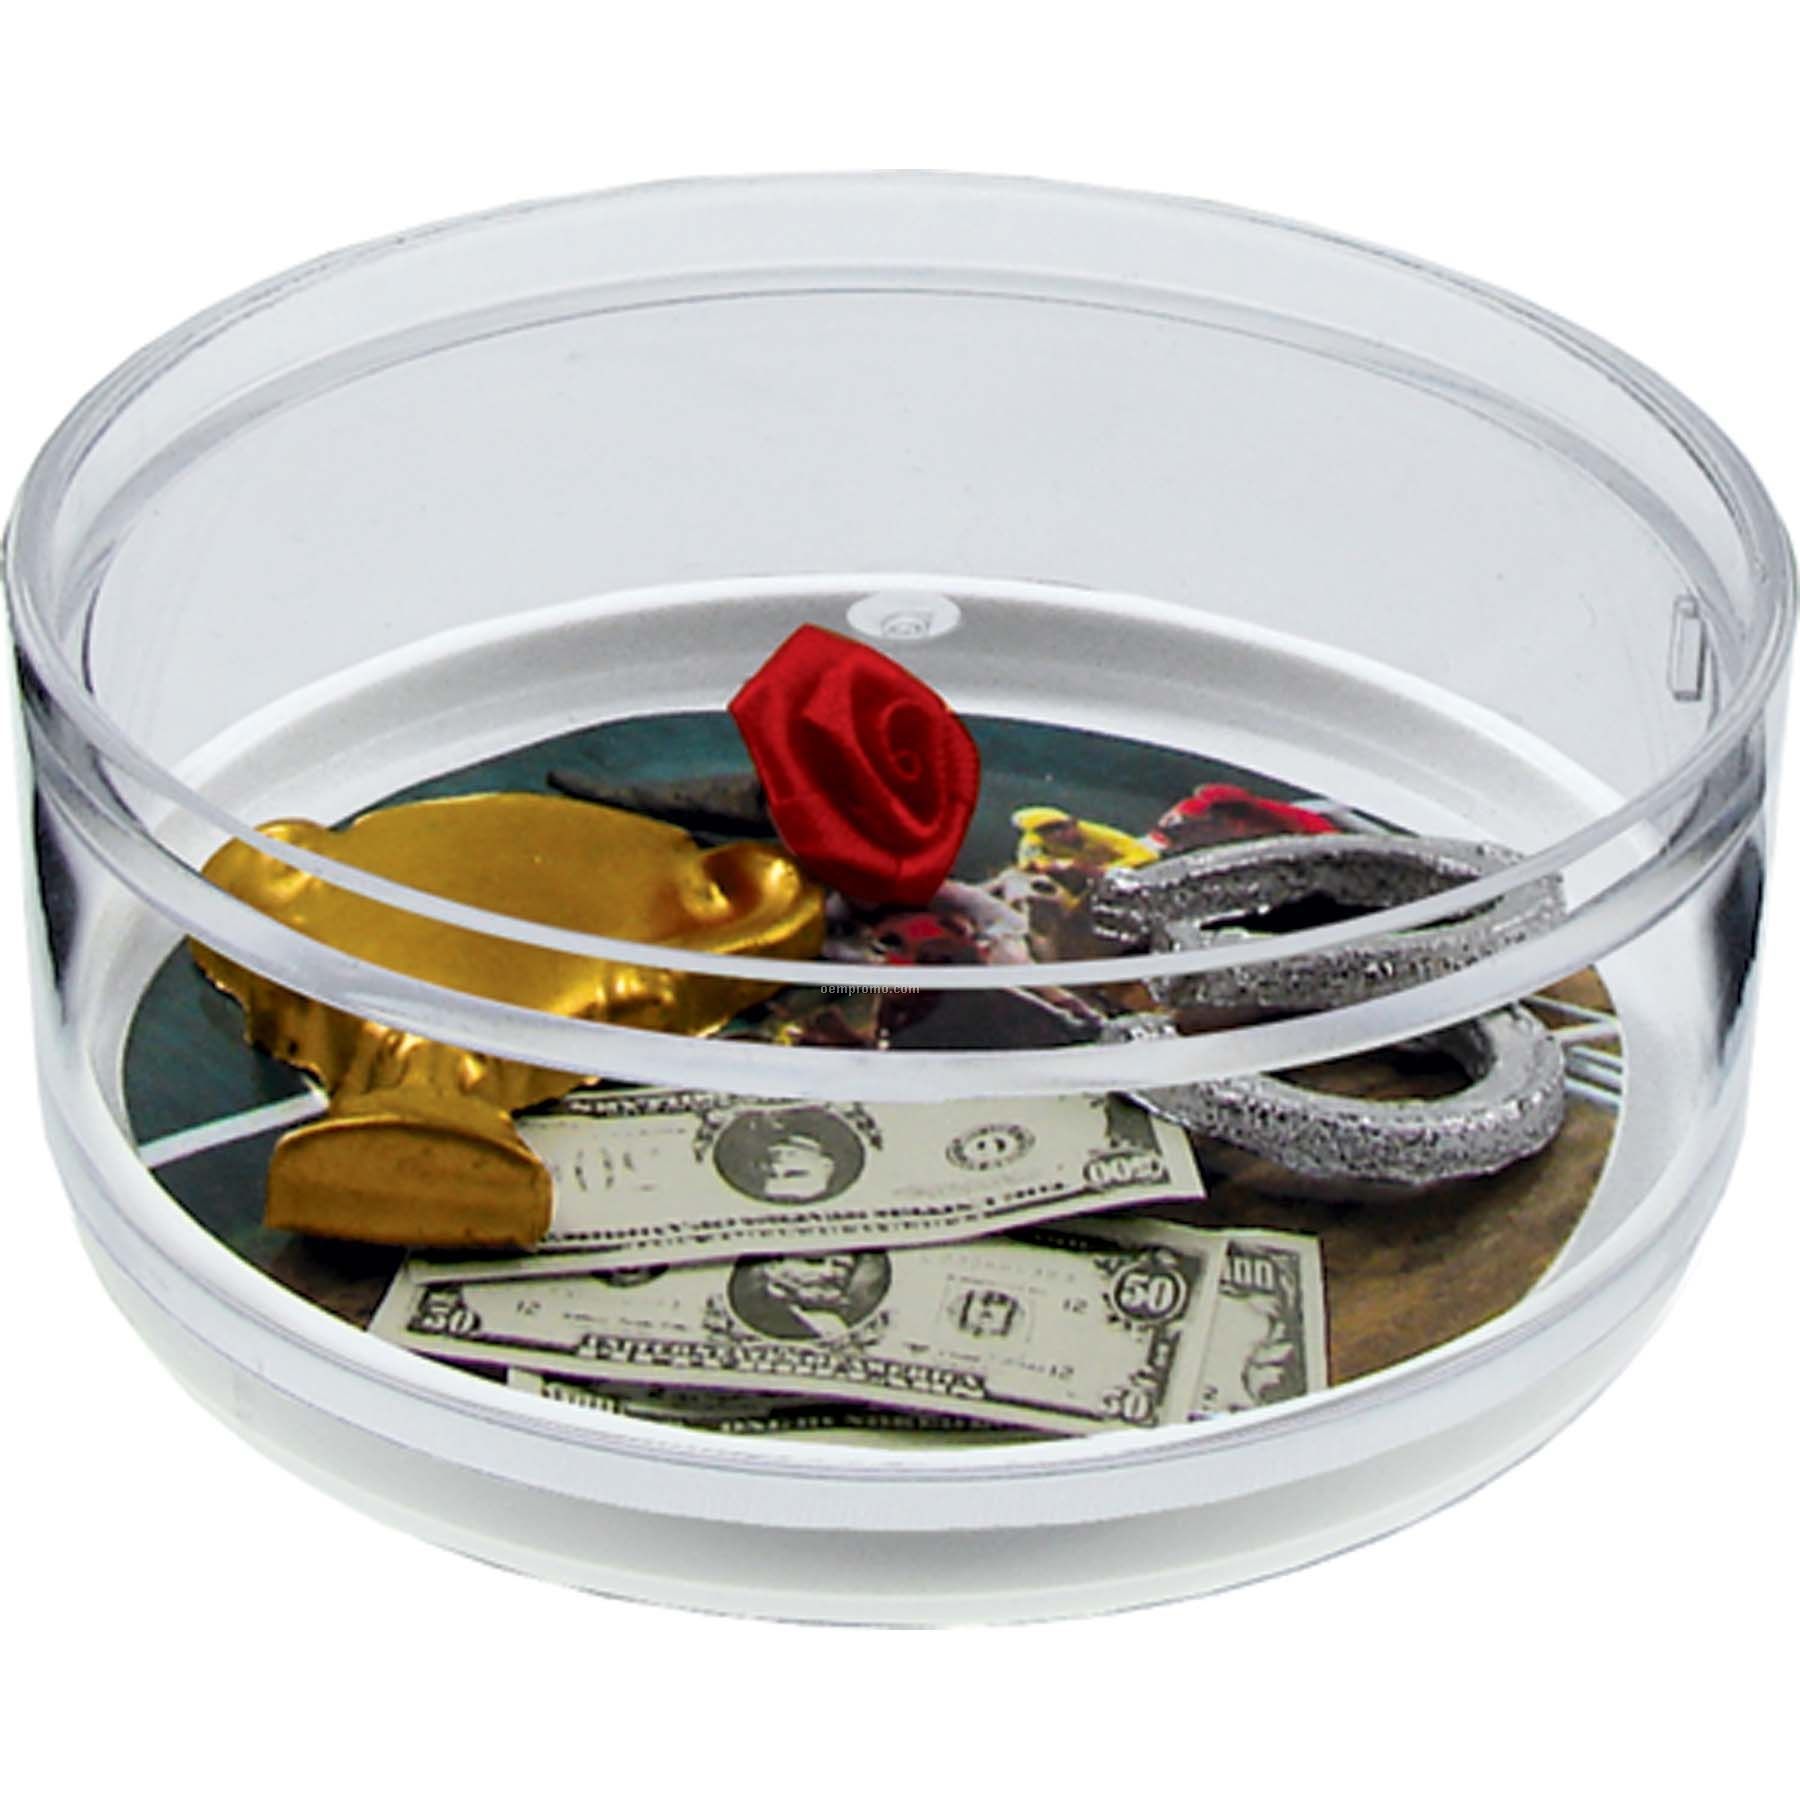 Win/ Place/ Show Compartment Coaster Caddy